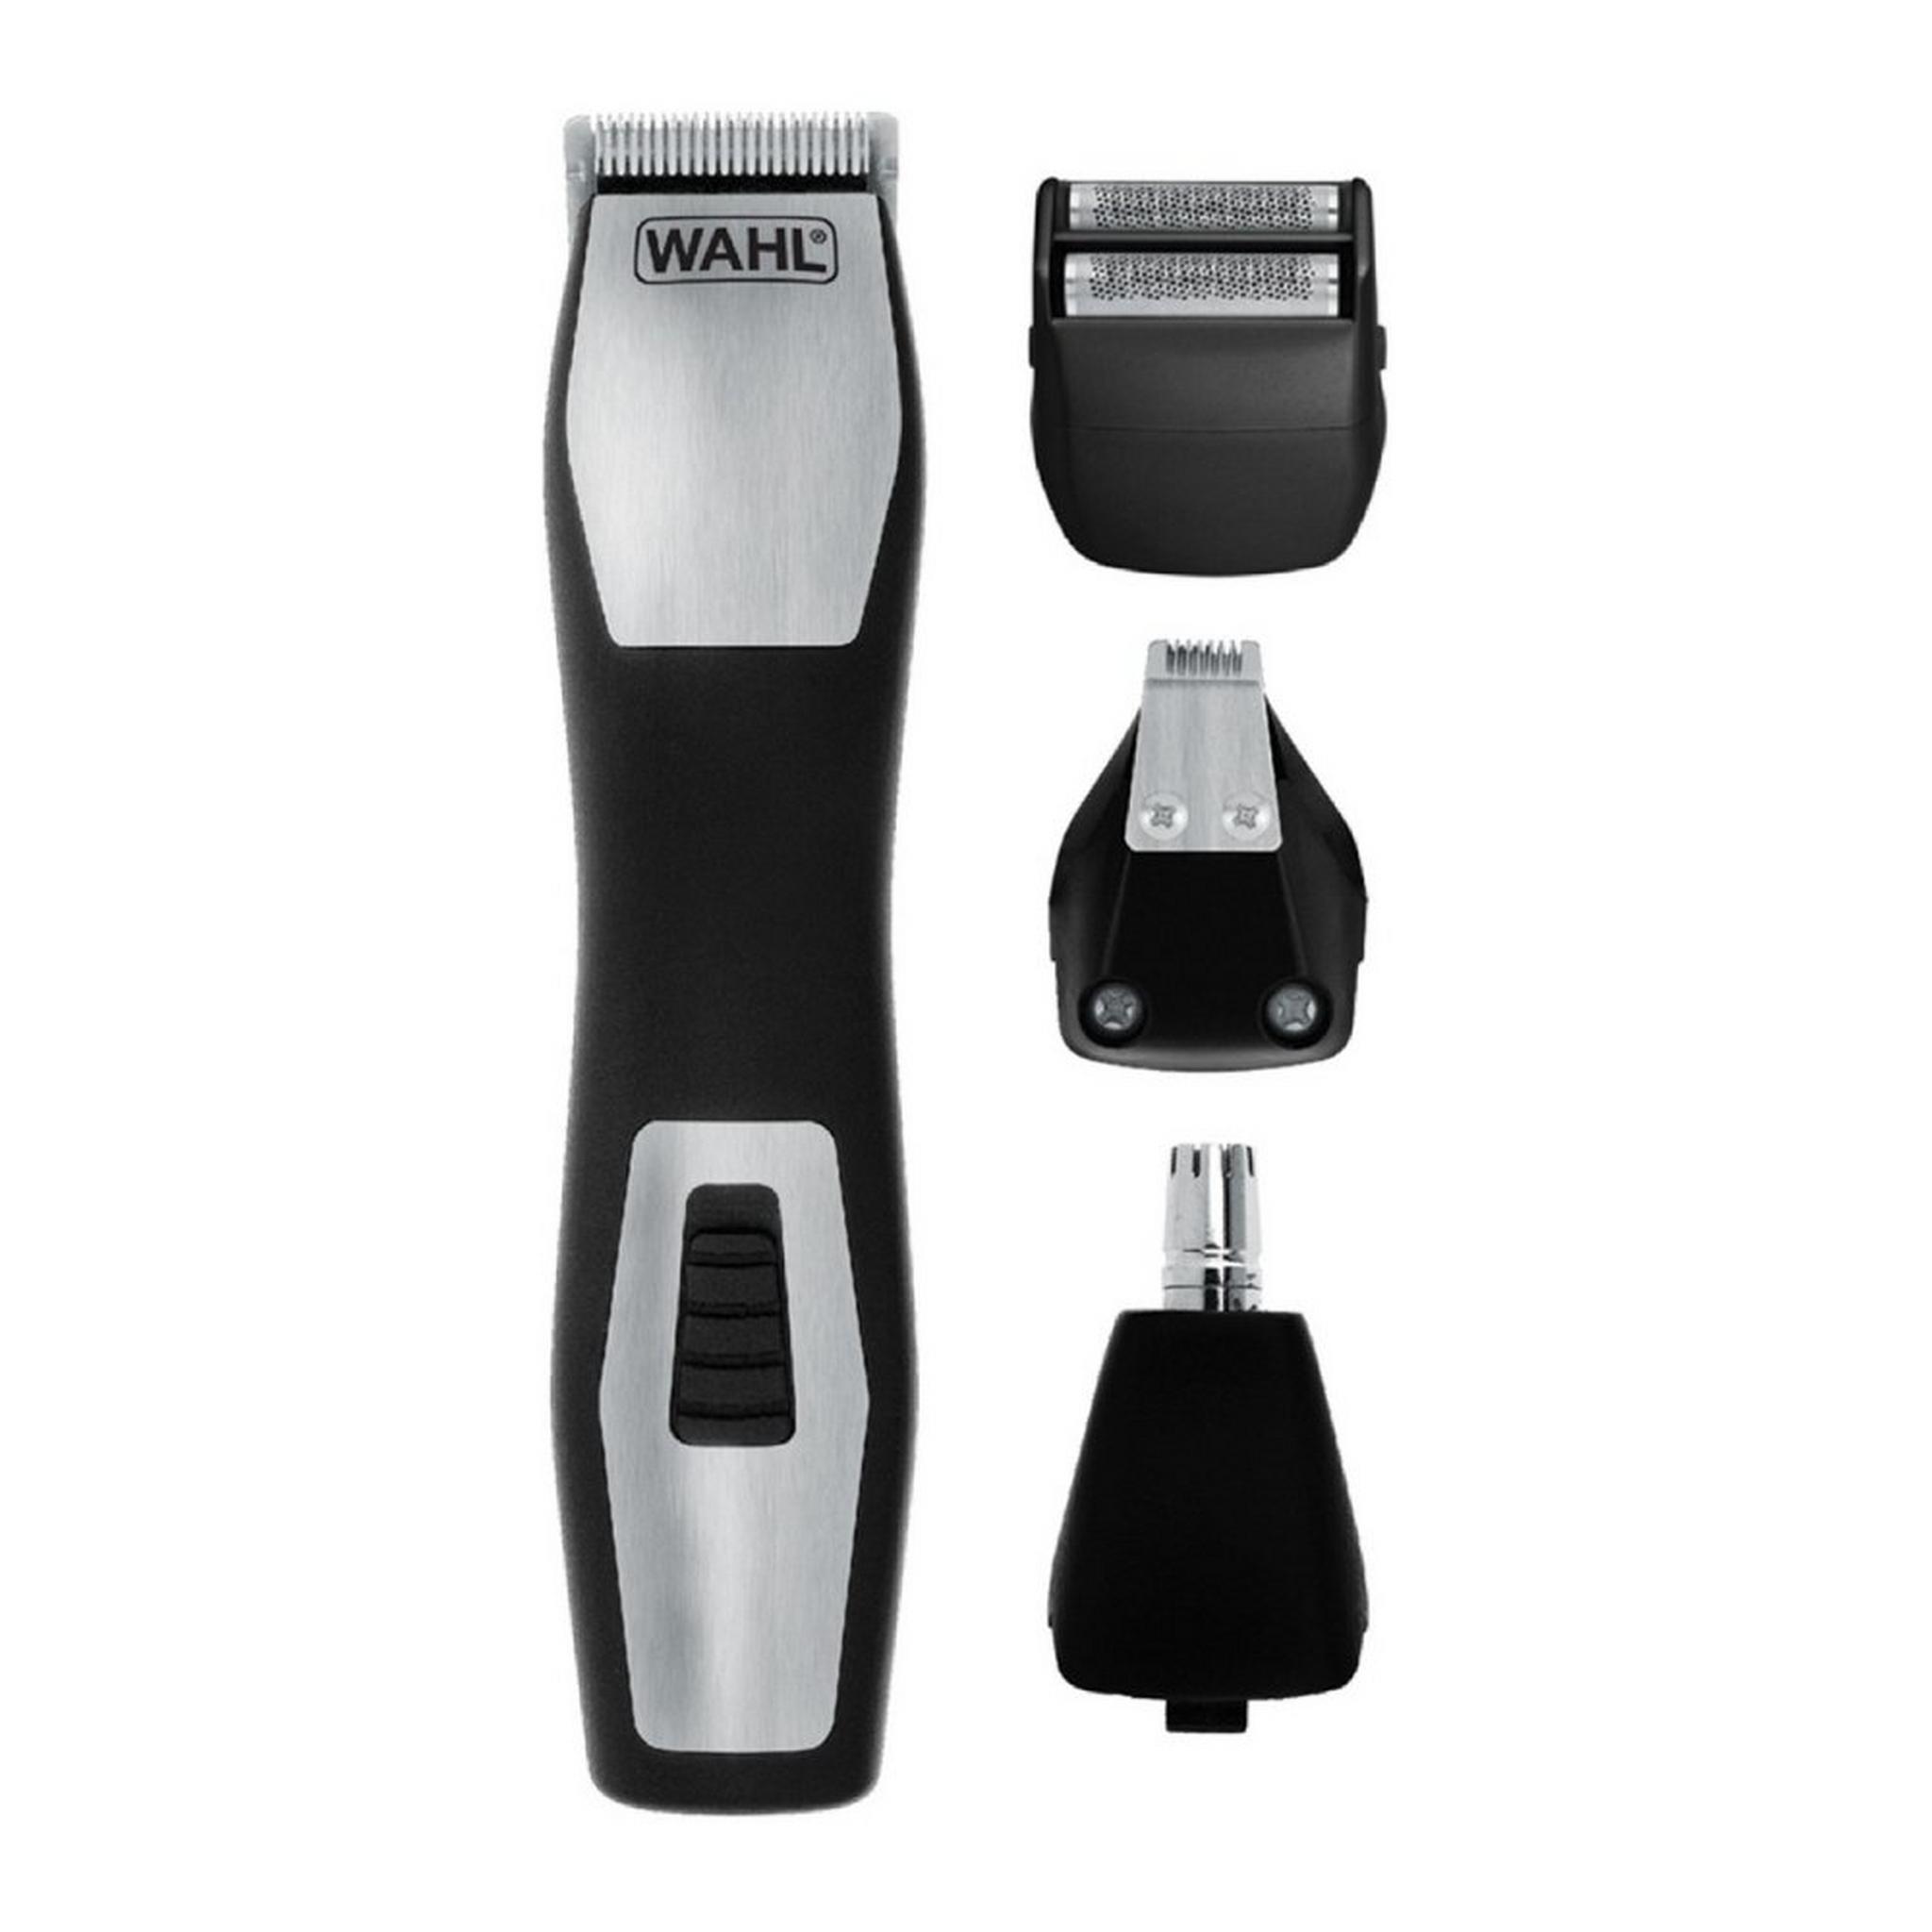 Wahl All in one Trimmer - 9855-1227